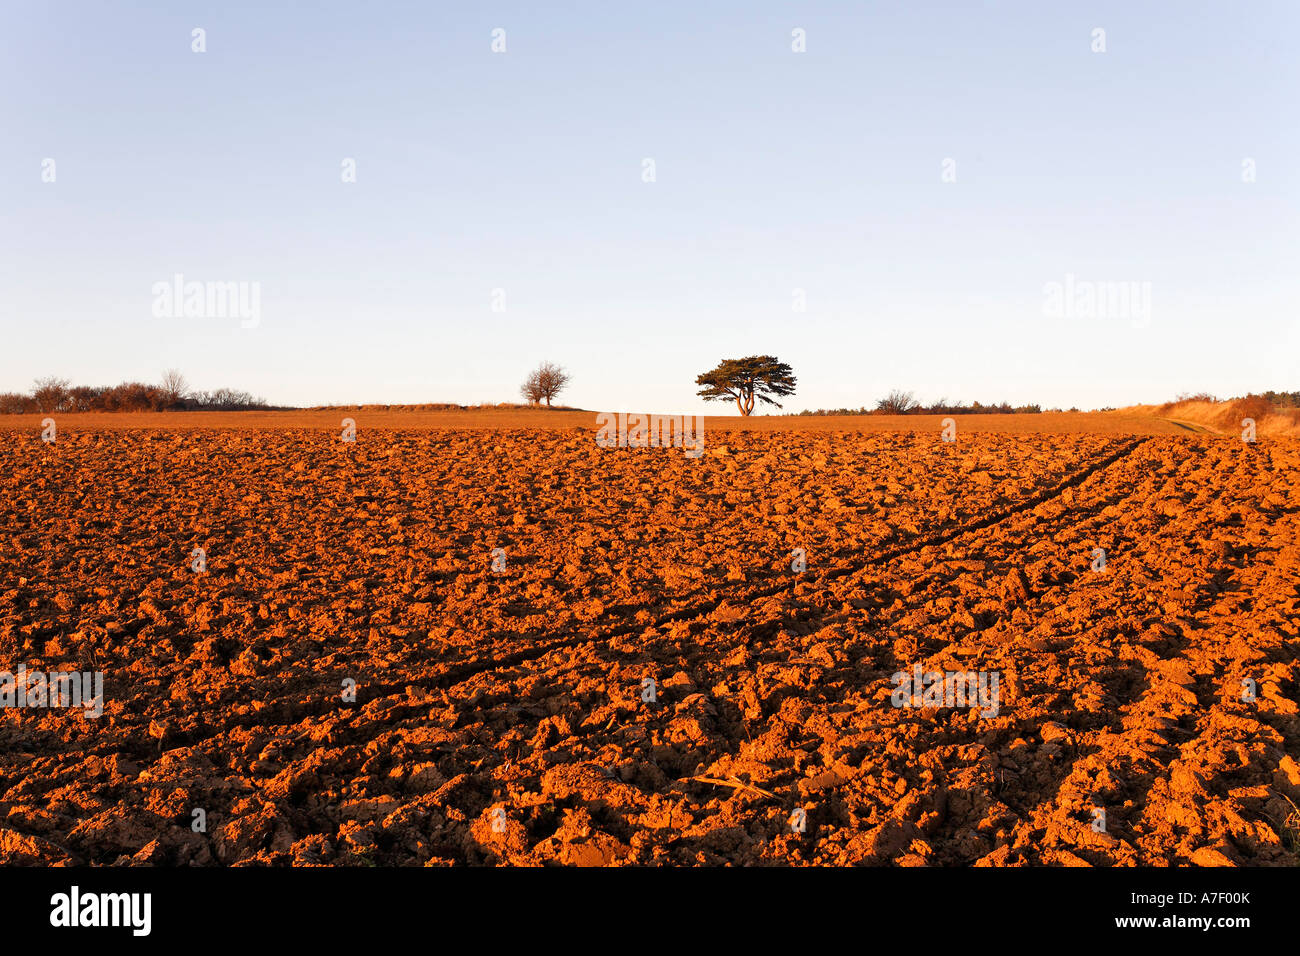 A ploughed field at sunset, Lower Austria, Austria Stock Photo